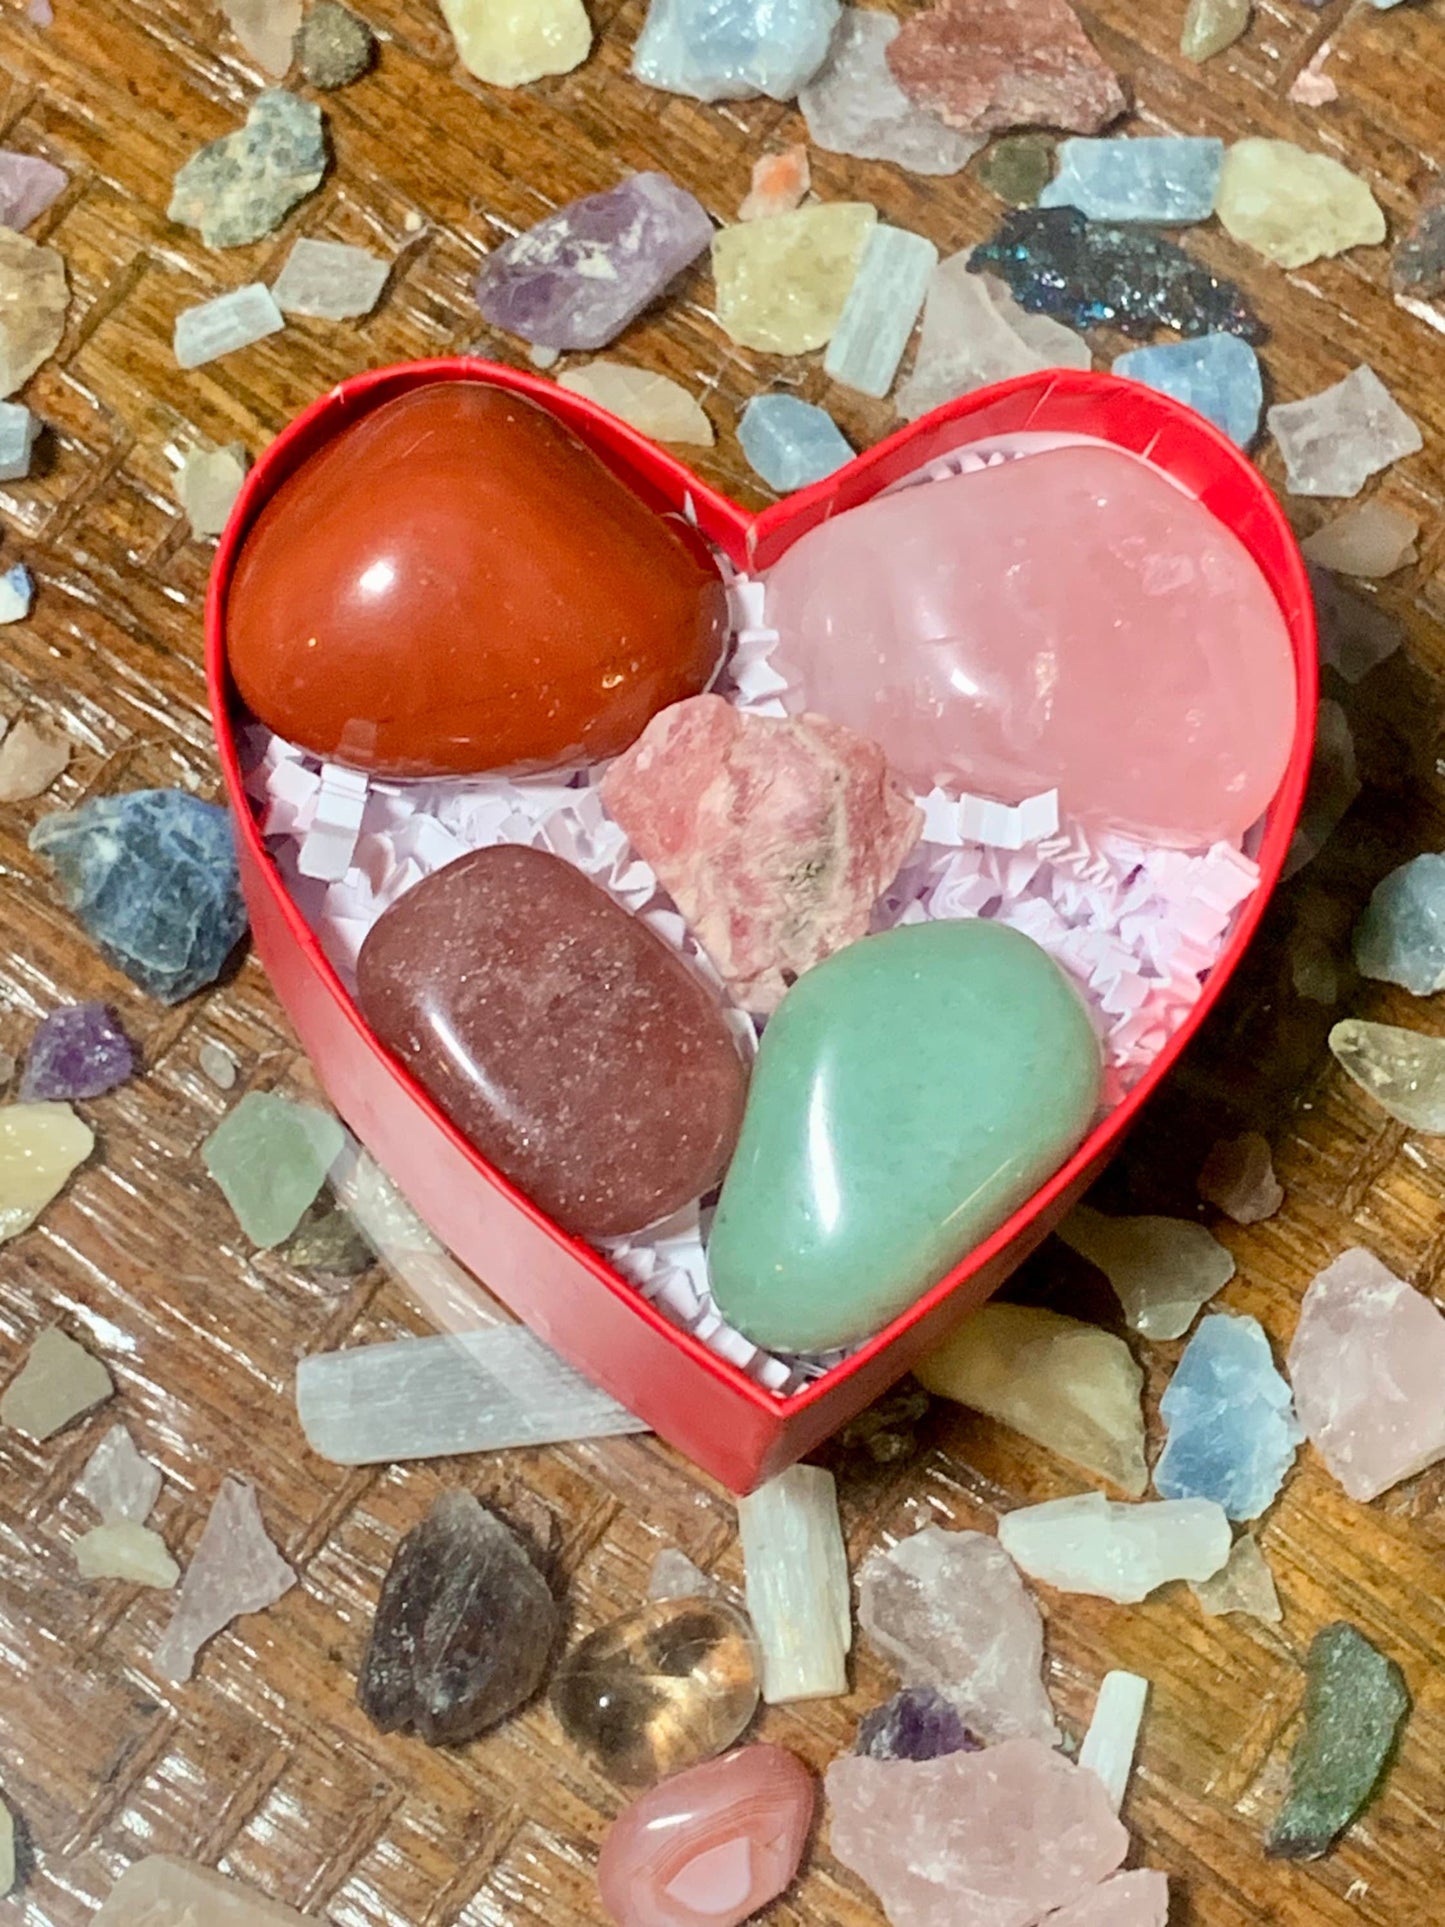 Love Stones Crystal Healing Set With Crystal Information Cards / Crystals for Manifesting and Attracting Love / Self-Love Crystals